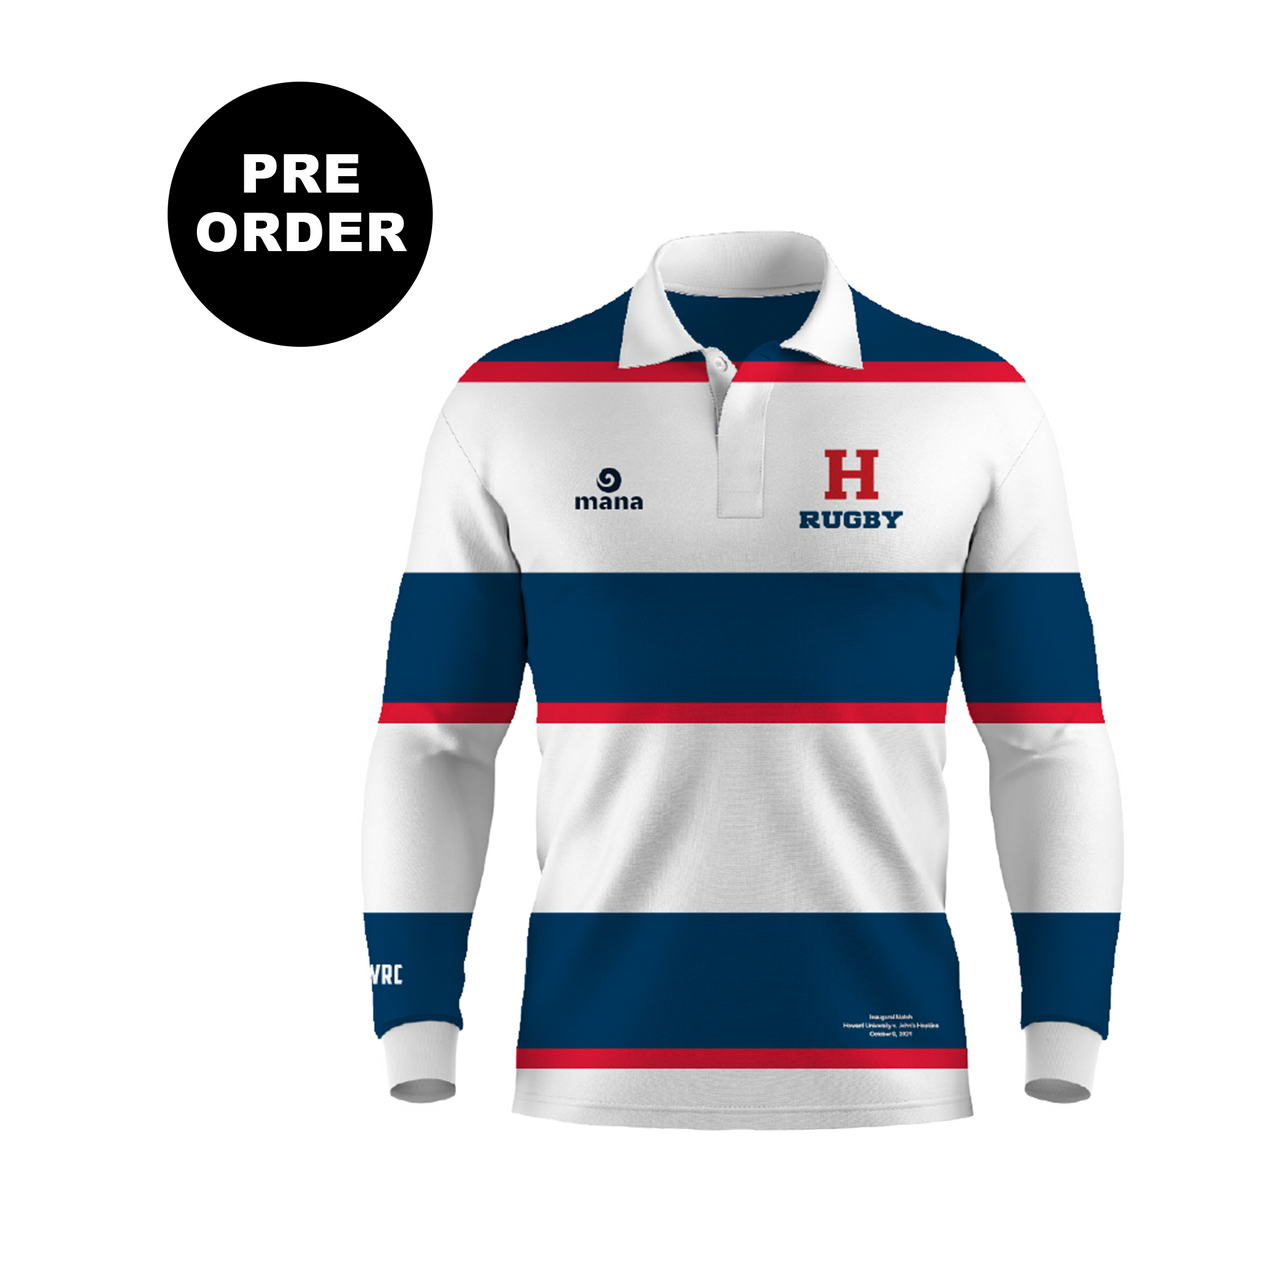 Howard University Classic Rugby Jersey - H Back Option